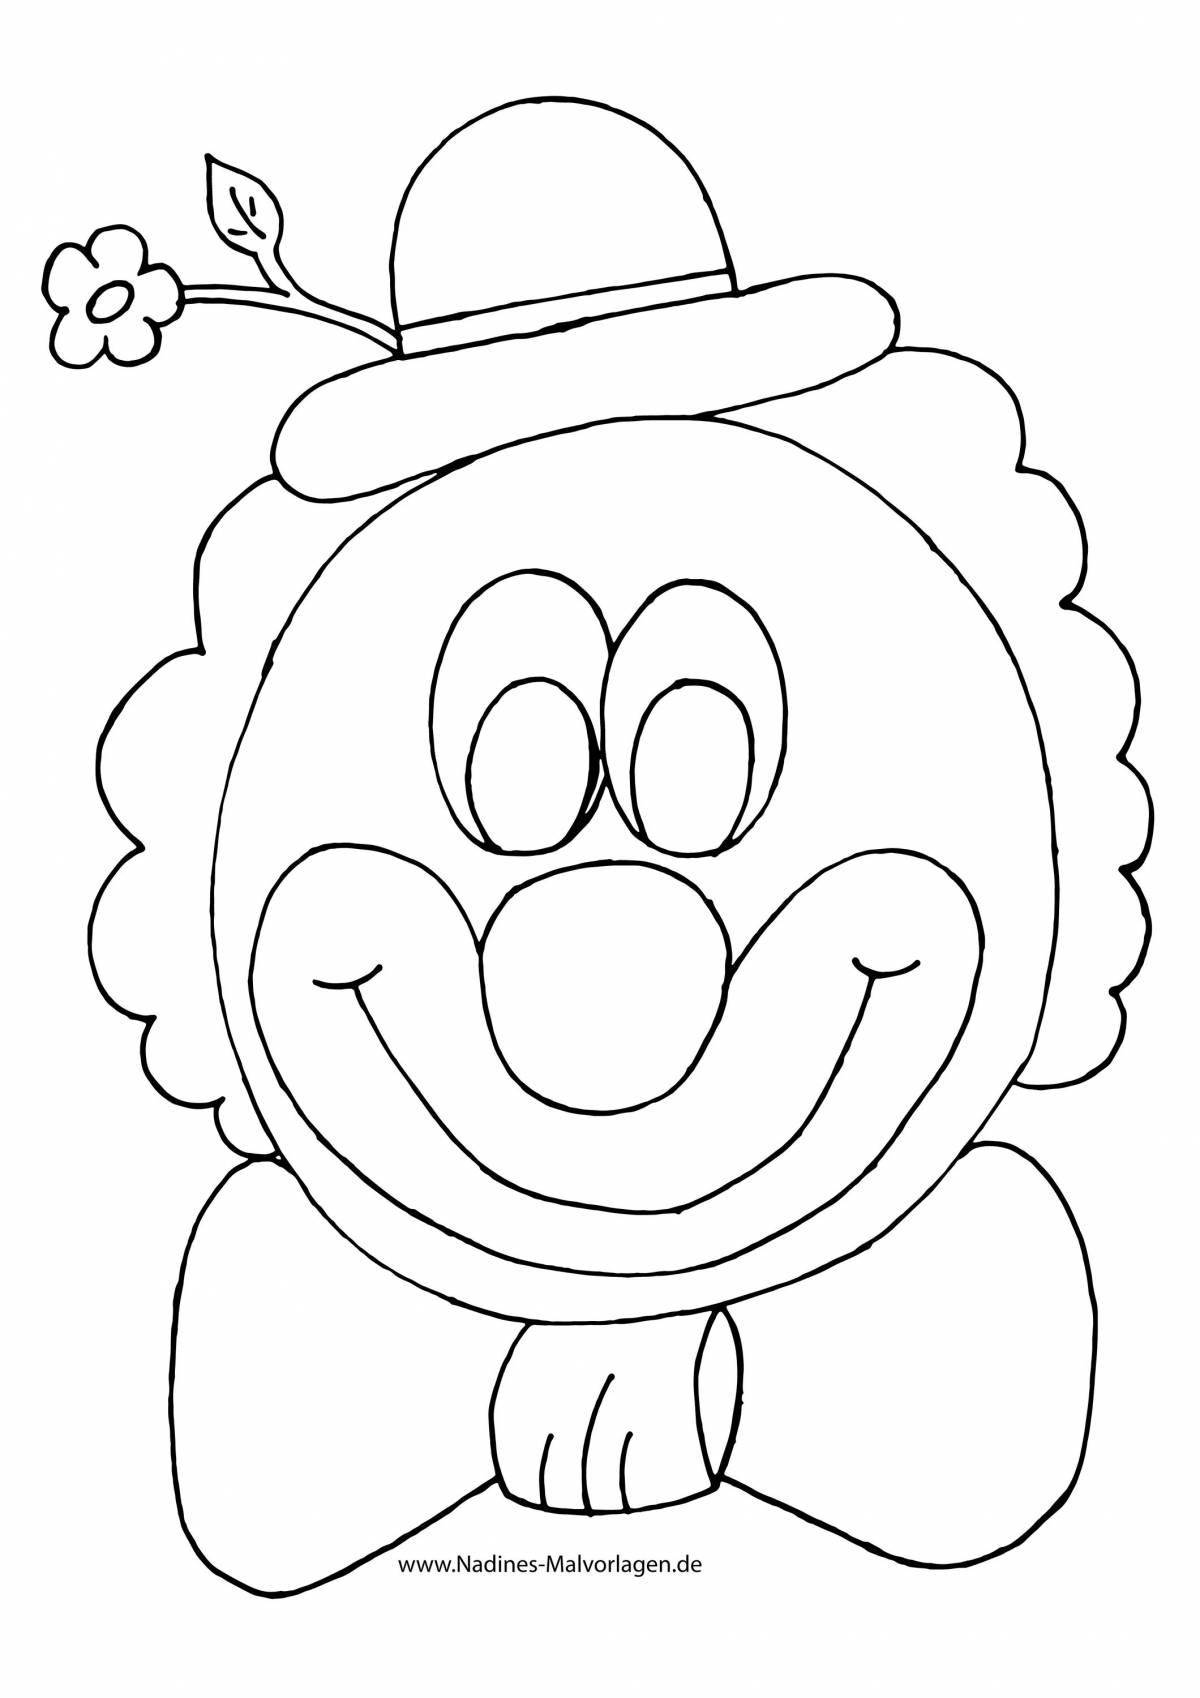 Glorious clown coloring page